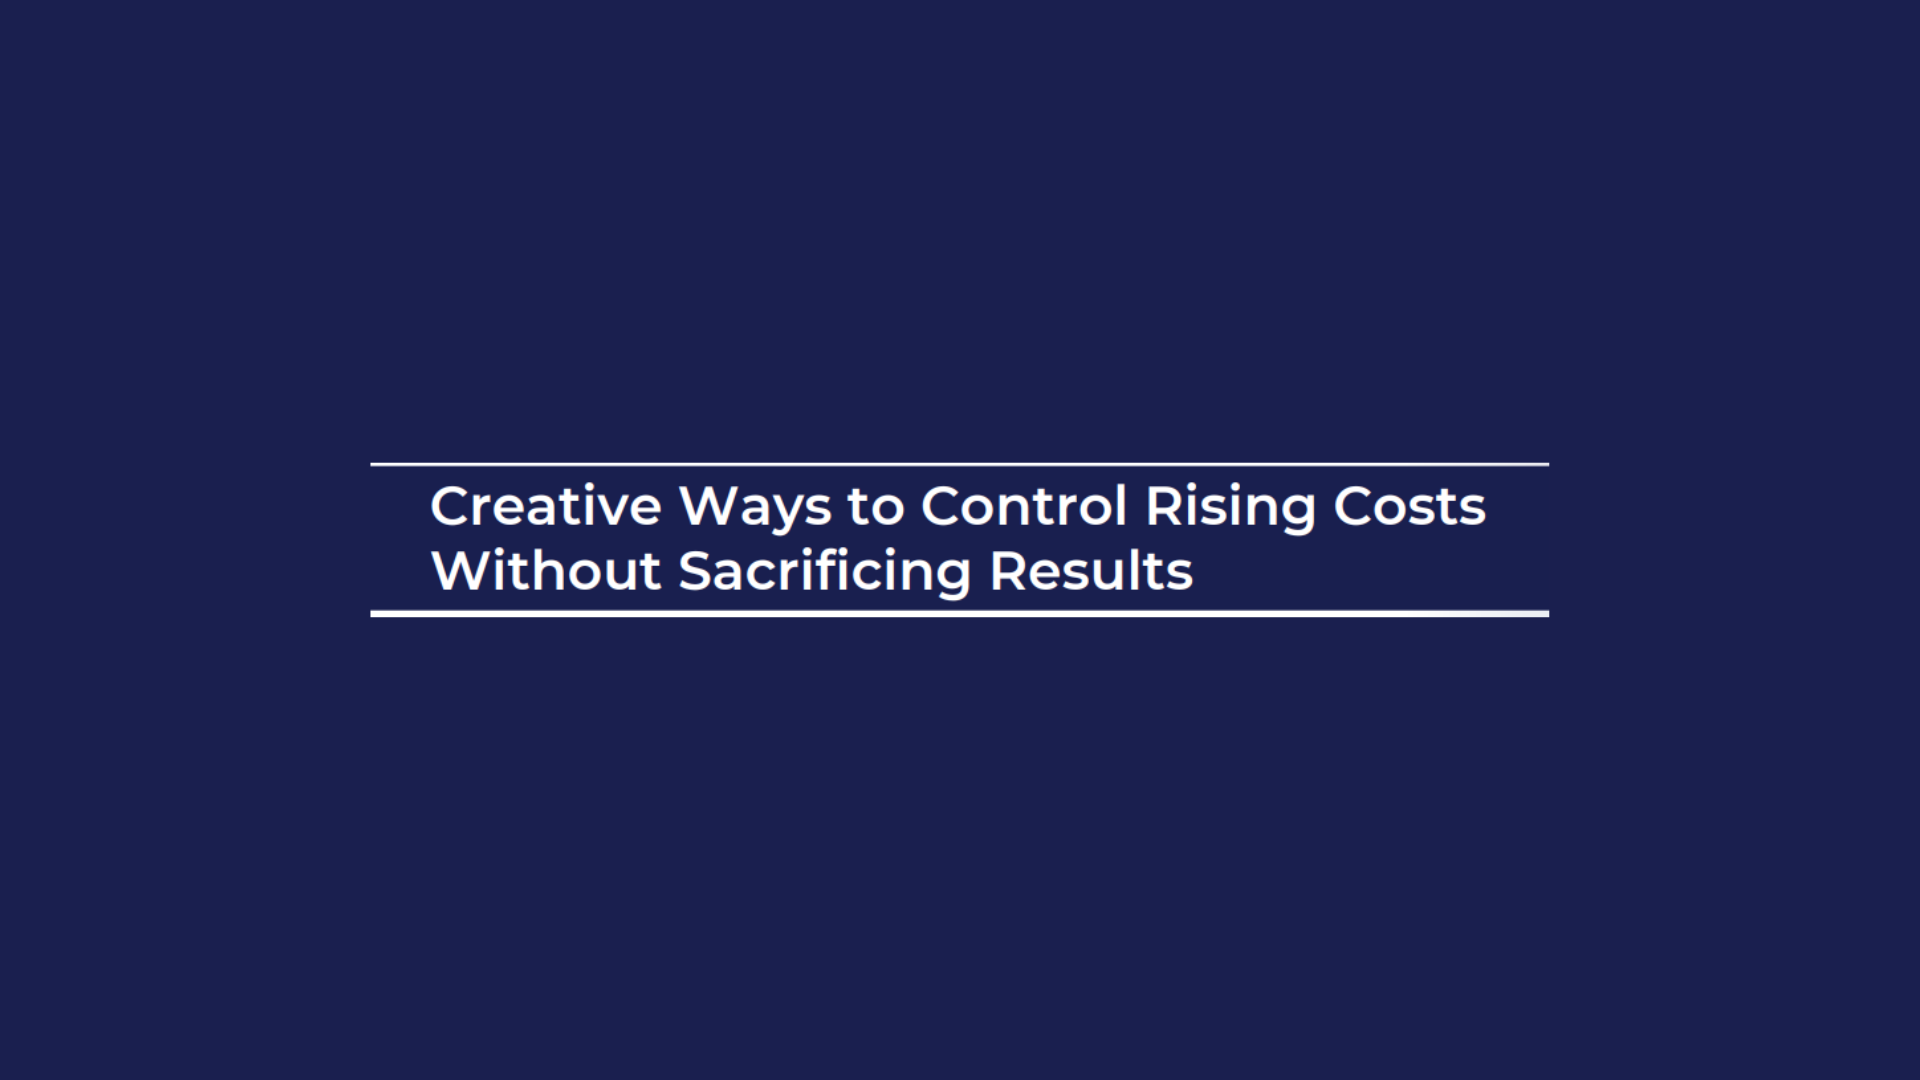 Creative Ways to Control Rising Costs Without Sacrificing Results